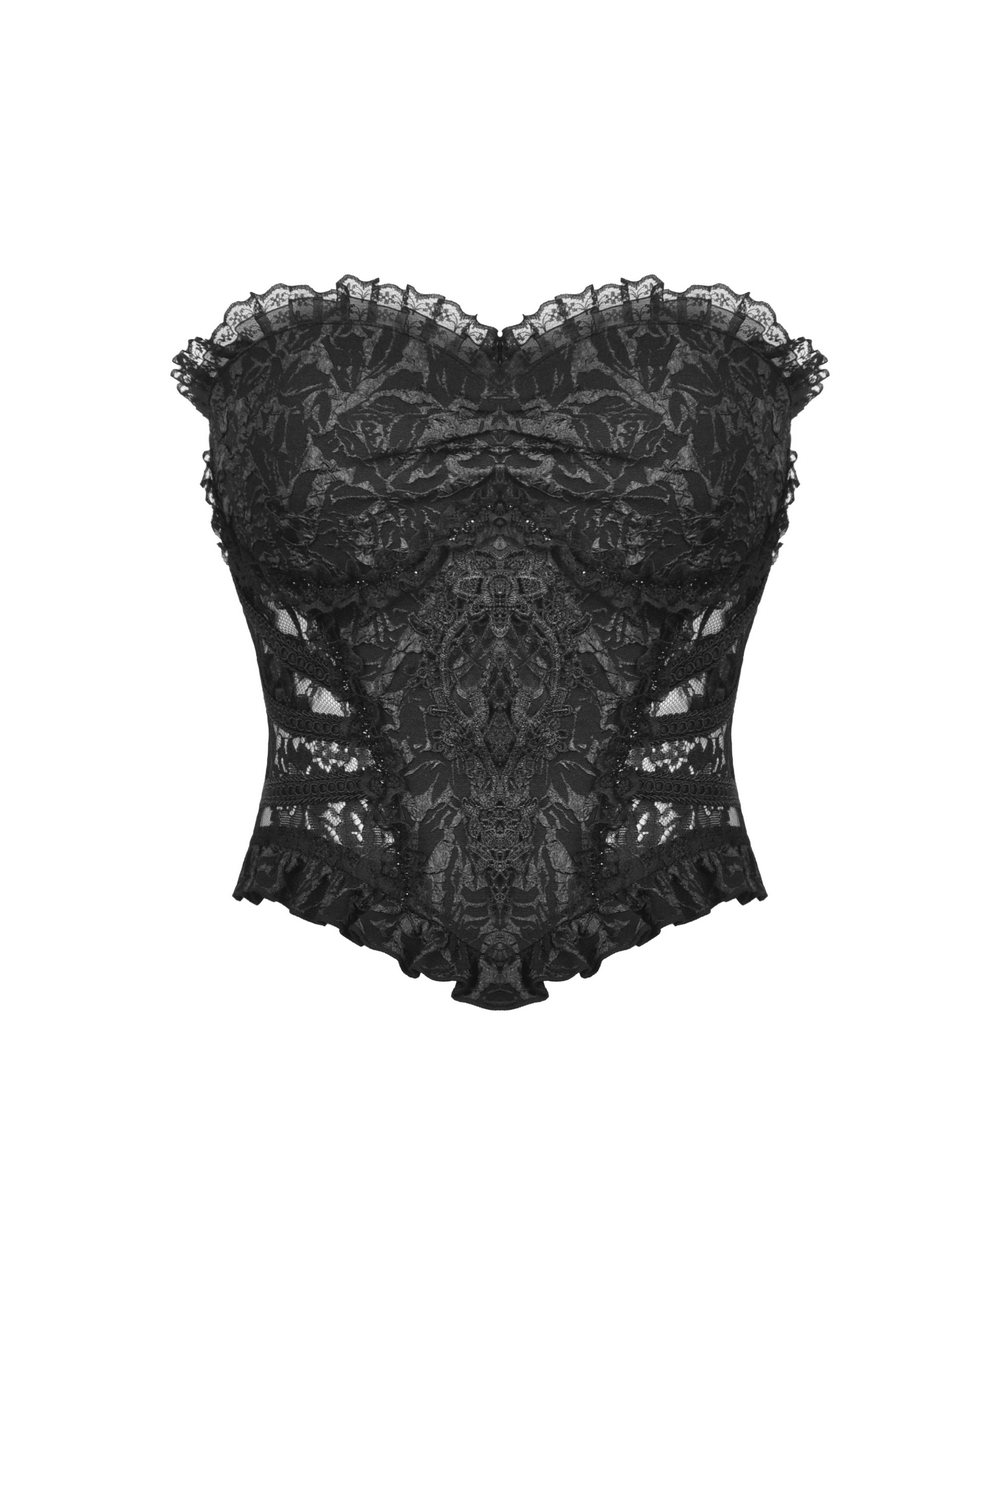 Gothic Sexy Lace-Up Black Lace Corset With Ruffles